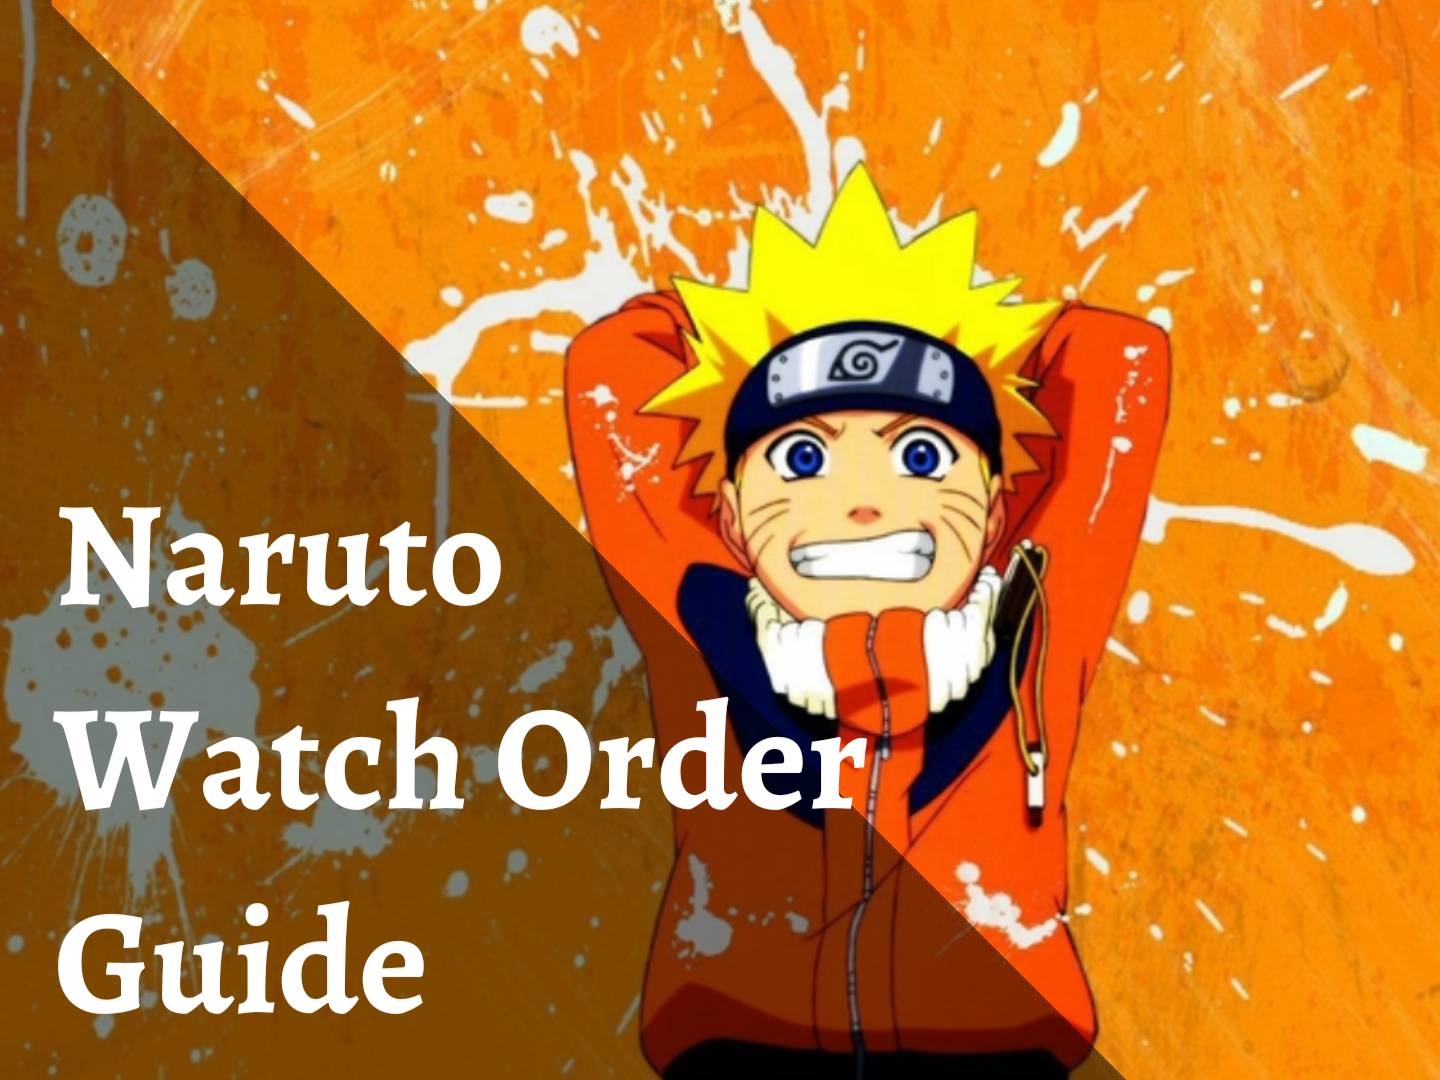 Naruto Watch Order Guide